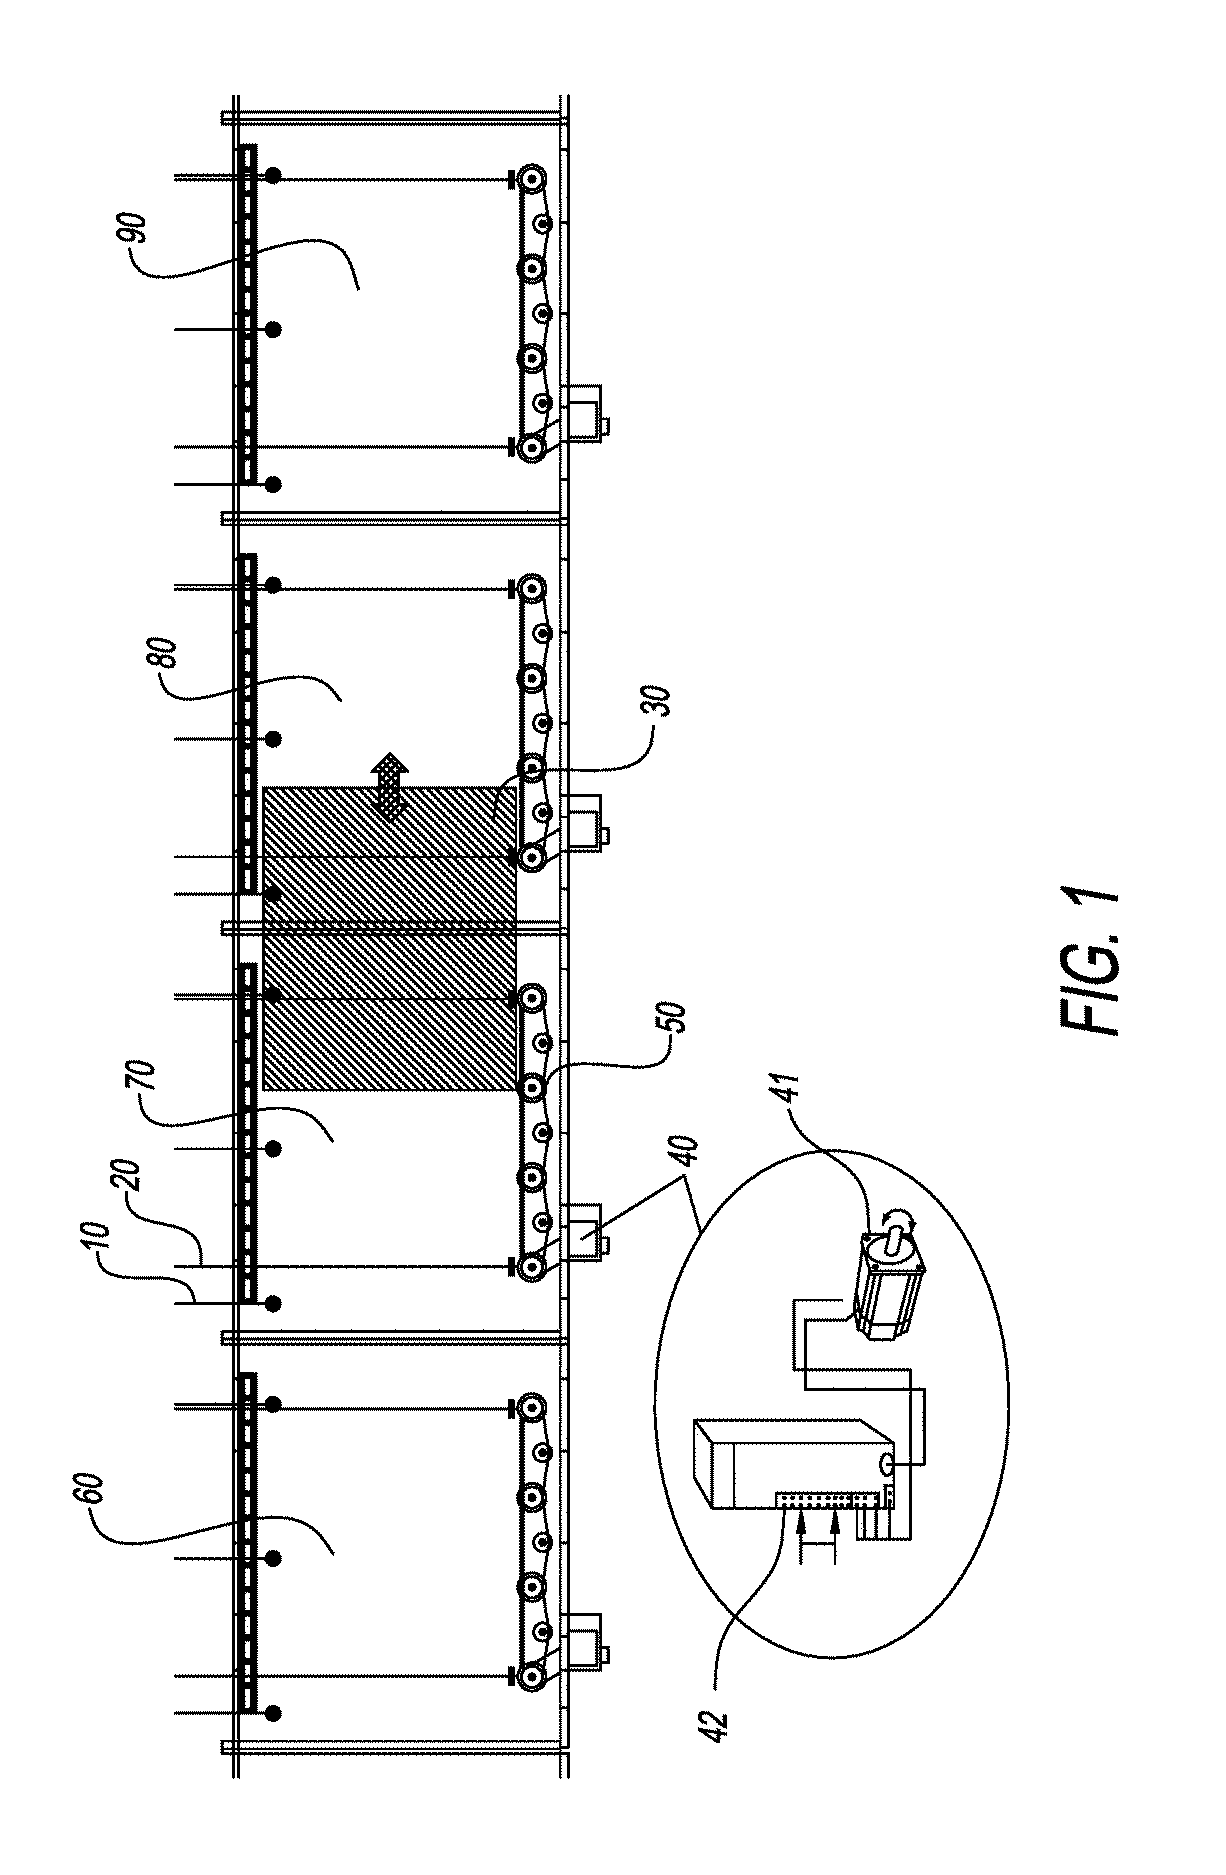 Method and device for stringing substrates together in coating systems